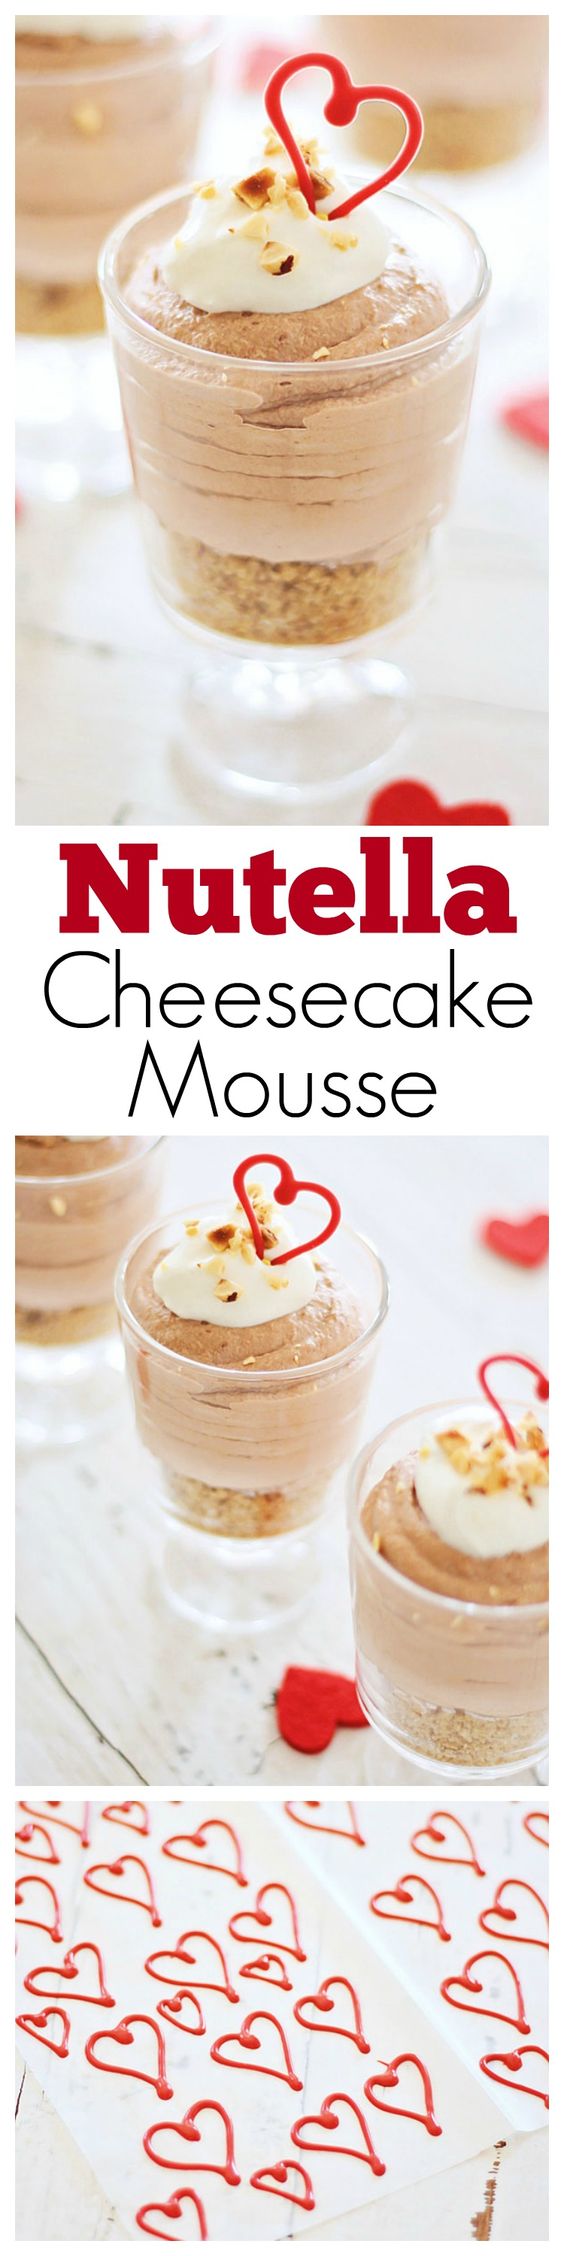 Nutella Cheesecake Mousse – light, fluffy Nutella cheesecake mousse in a glass, with hazelnuts. Super easy dessert recipe for special occasions | rasamalaysia.com